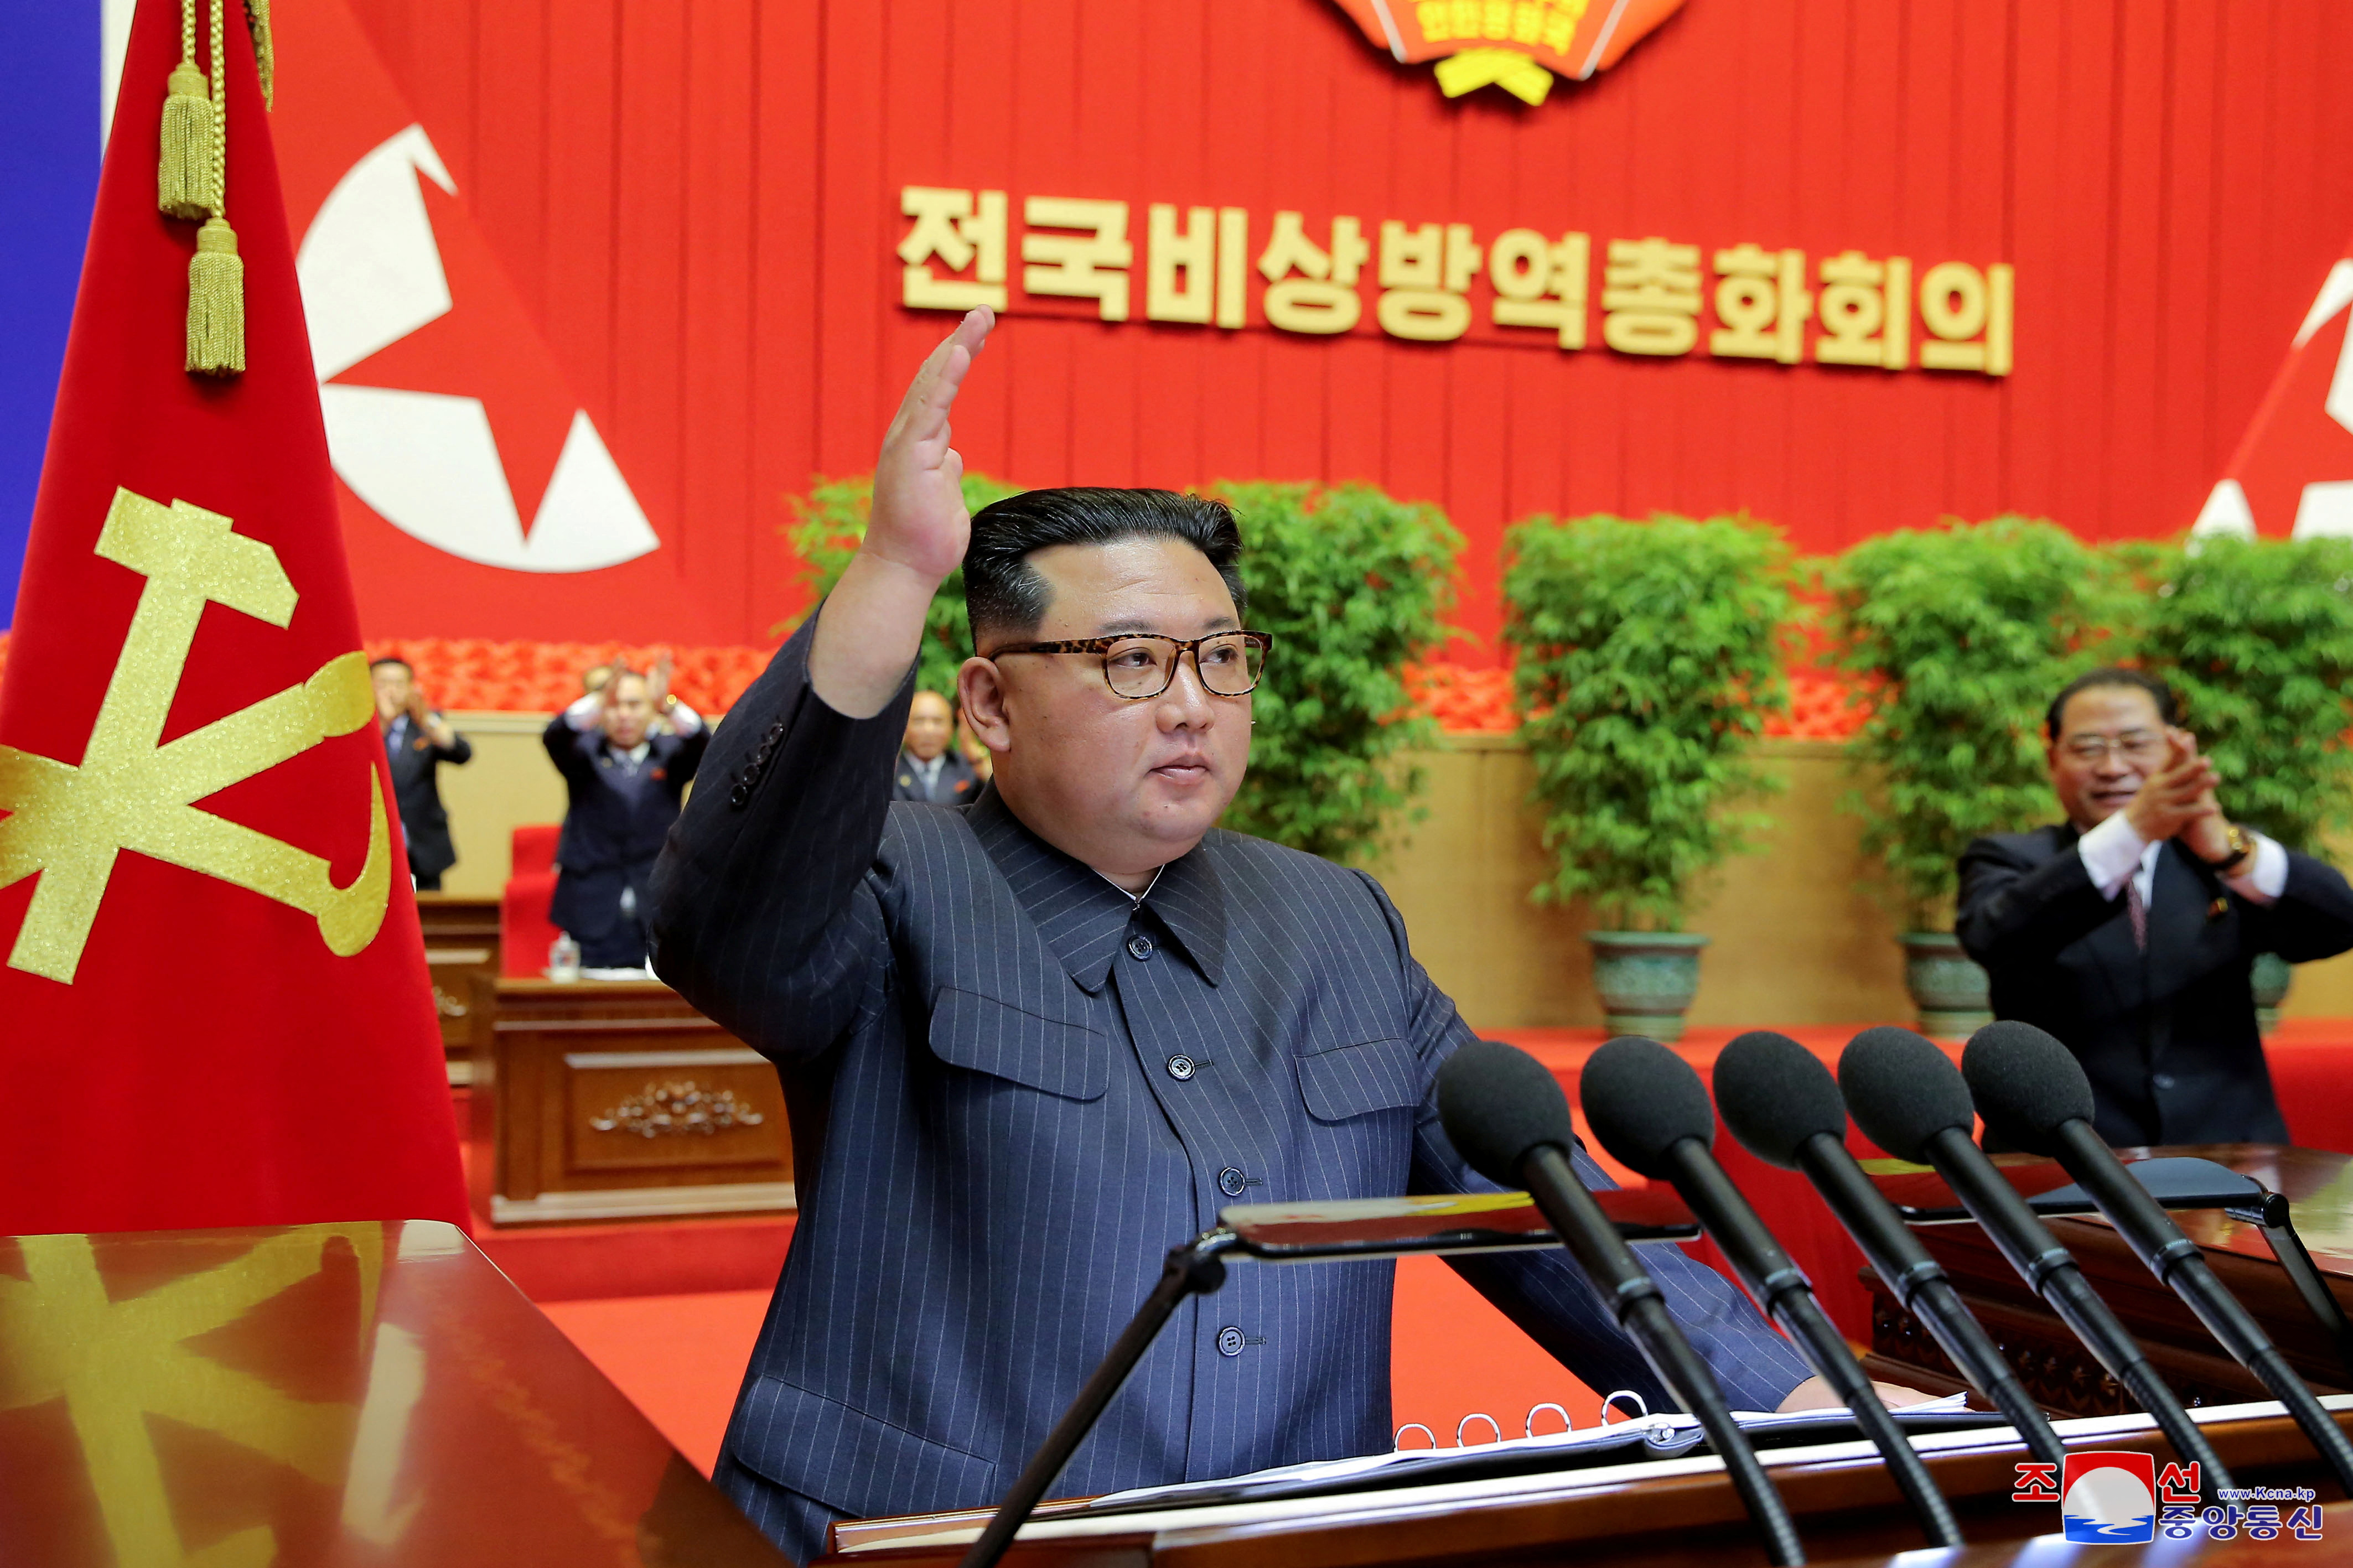 Kim Jong-un gestures to the public at the meeting that the "victoria" against COVID (KCNA-Reuters)